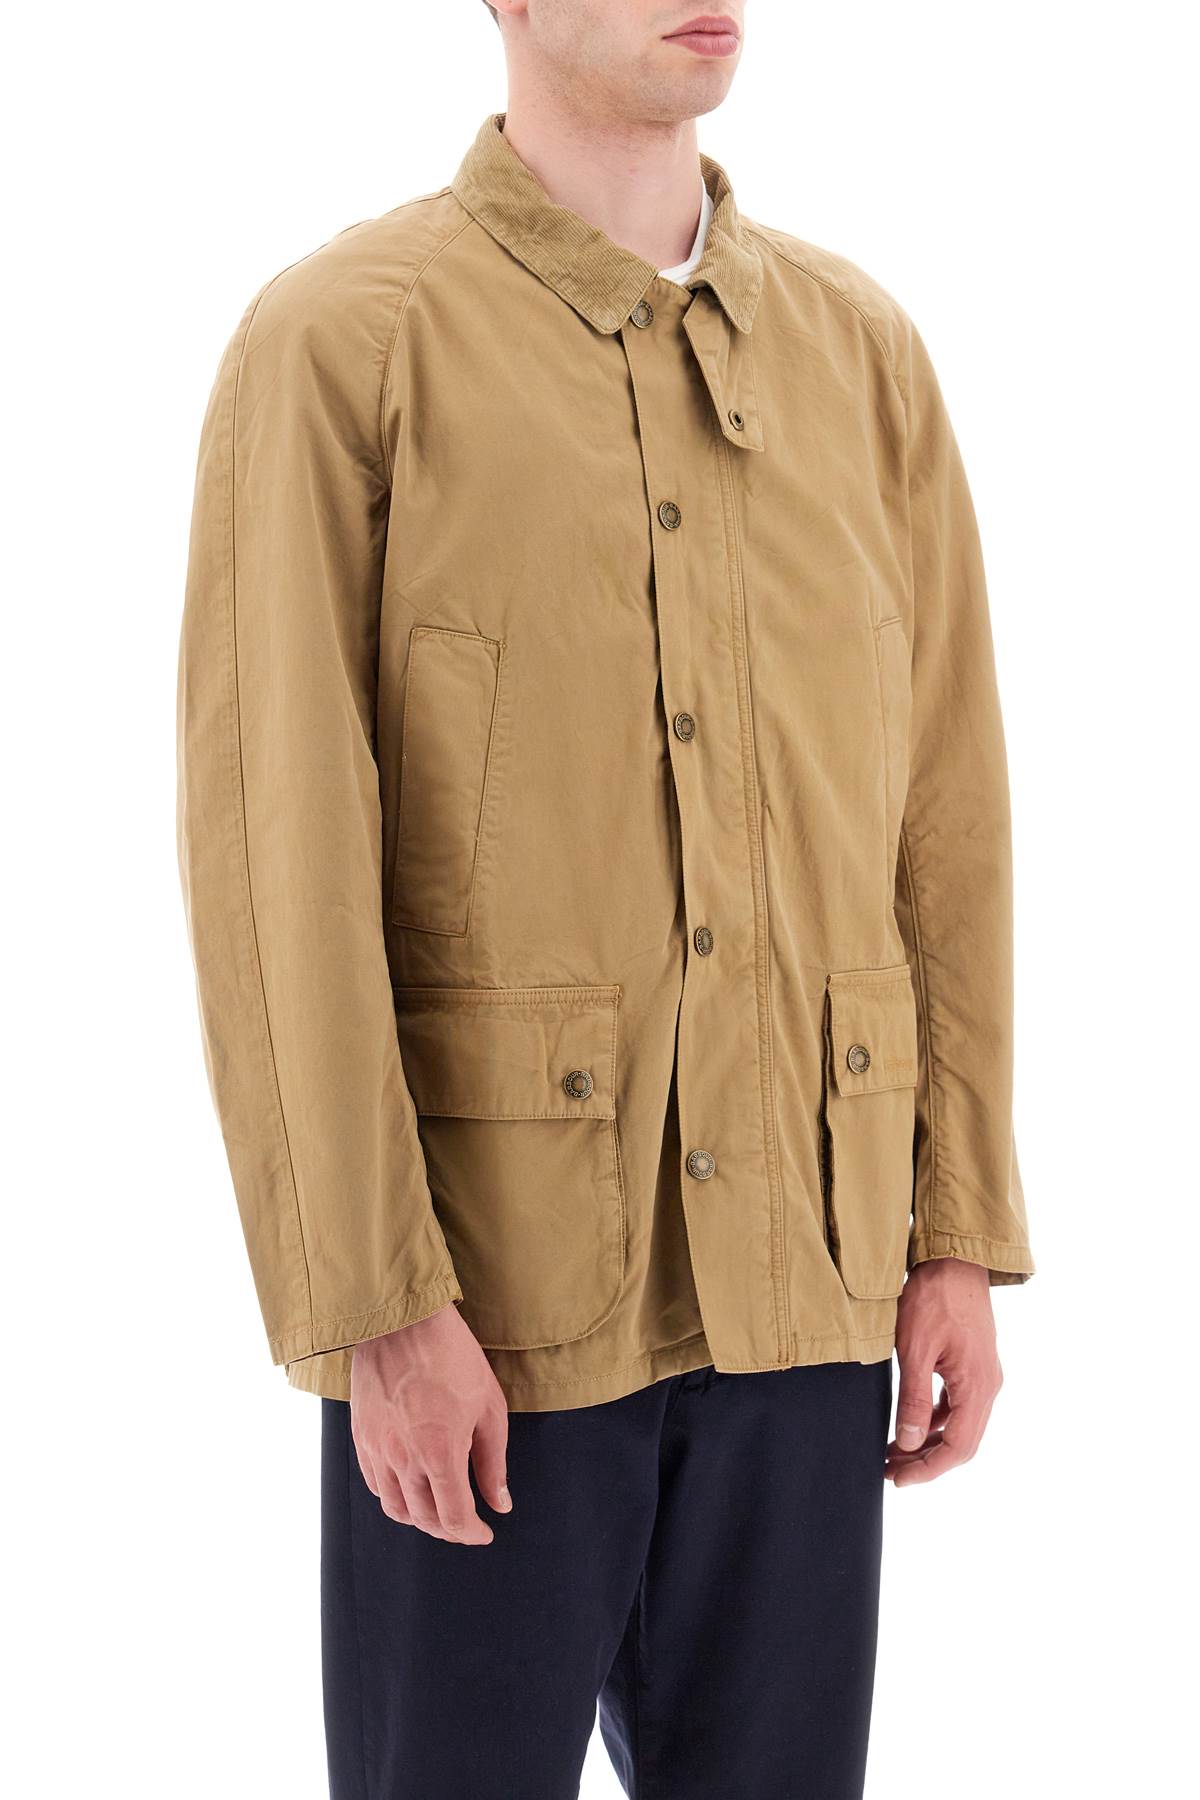 Barbour 'ashby' casual jacket